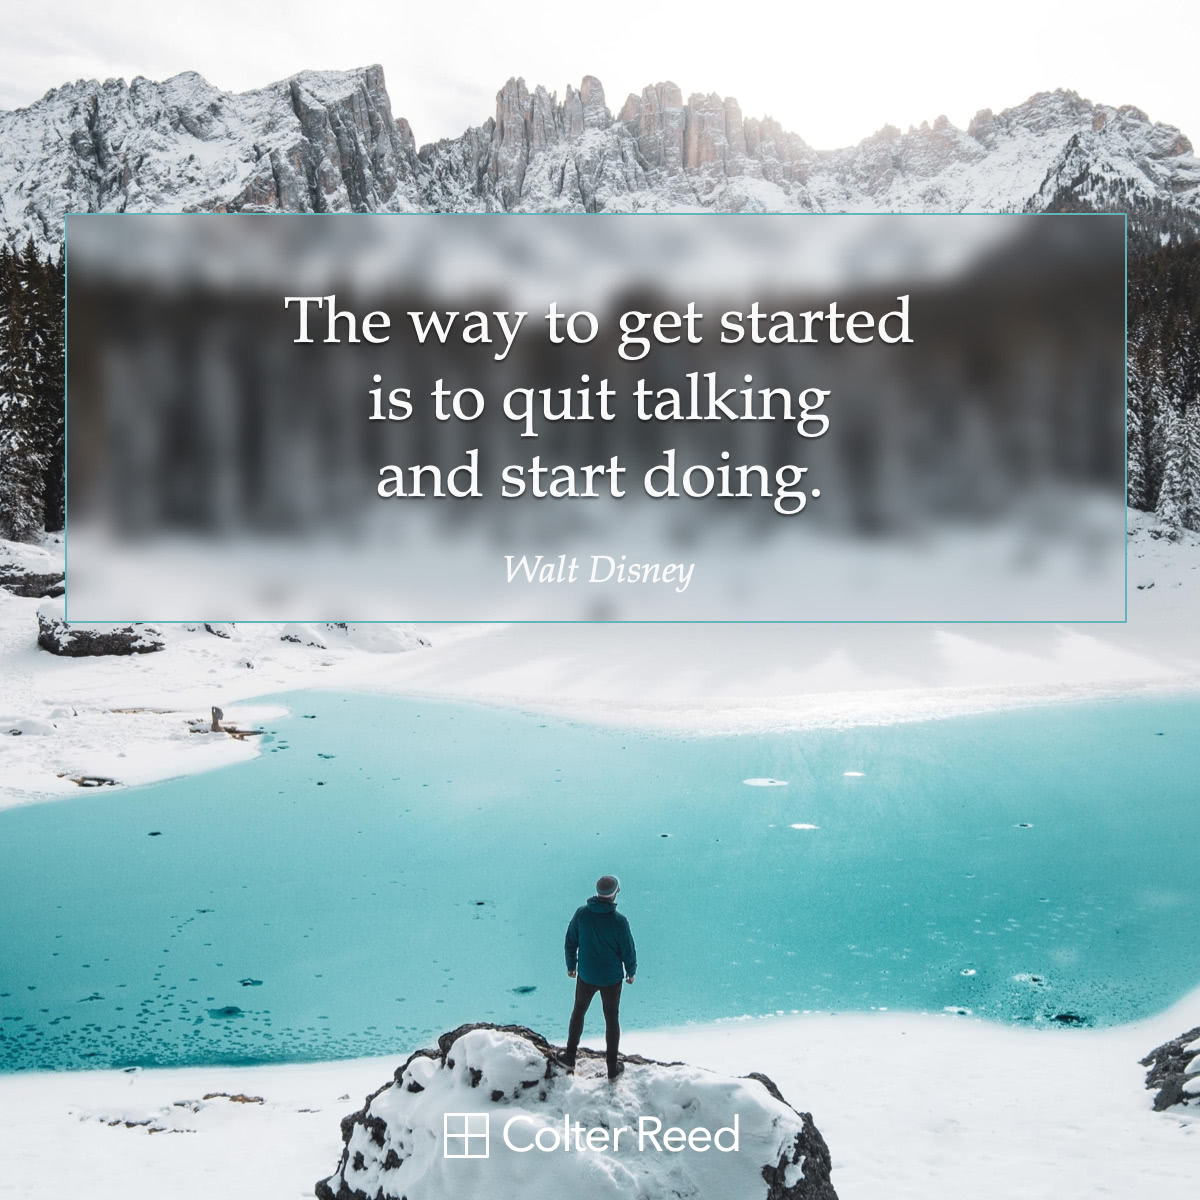 The way to get started is to quit talking and start doing. —Walt Disney